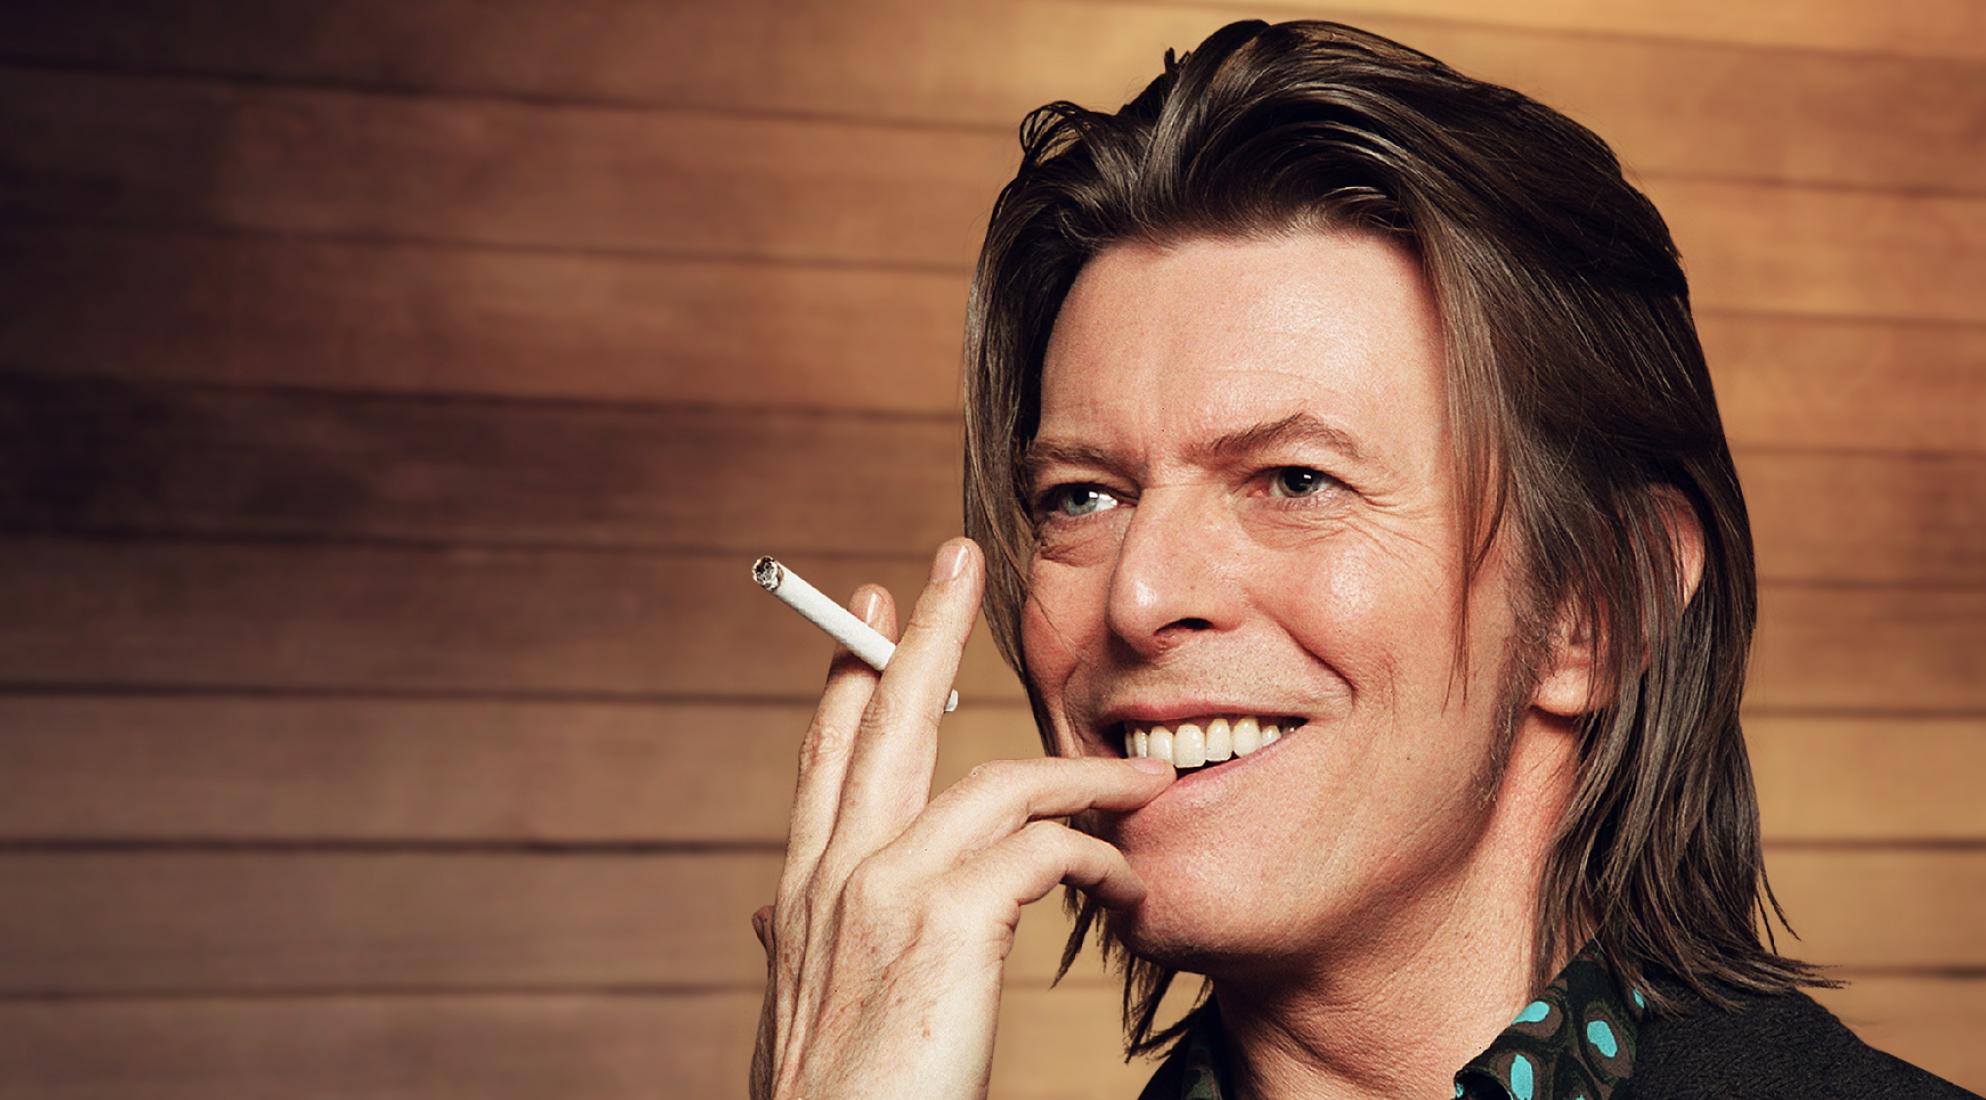 An image of David Bowie smiling with a cigarette in his hand.